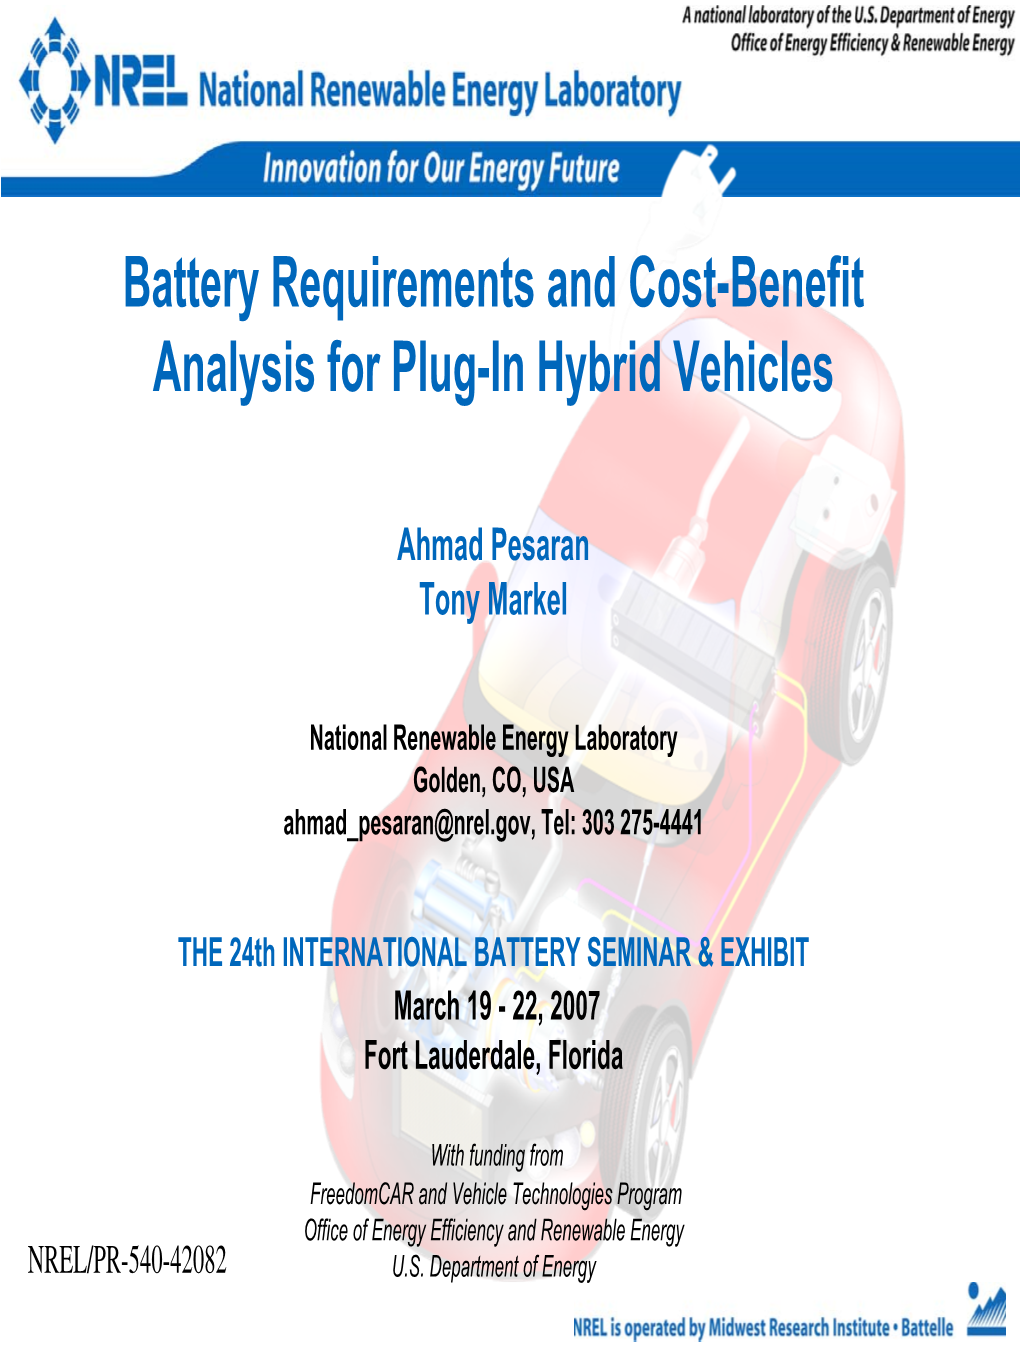 Battery Requirements and Cost-Benefit Analysis for Plug-In Hybrid Vehicles